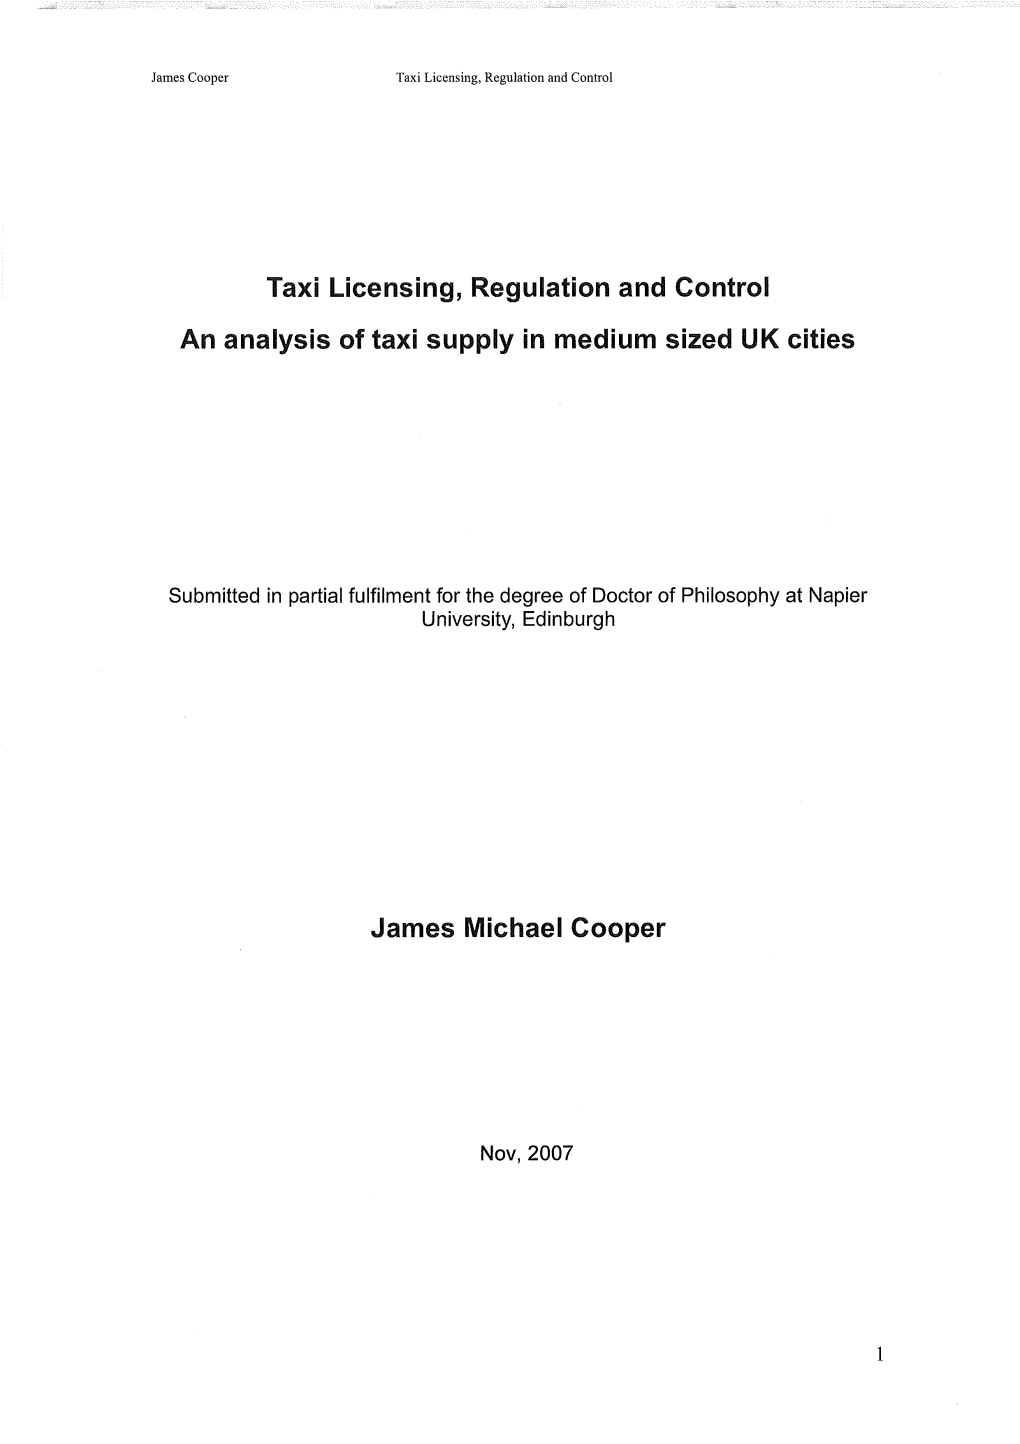 Taxi Licensing, Regulation and Control an Analysis of Taxi Supply in Medium Sized UK Cities